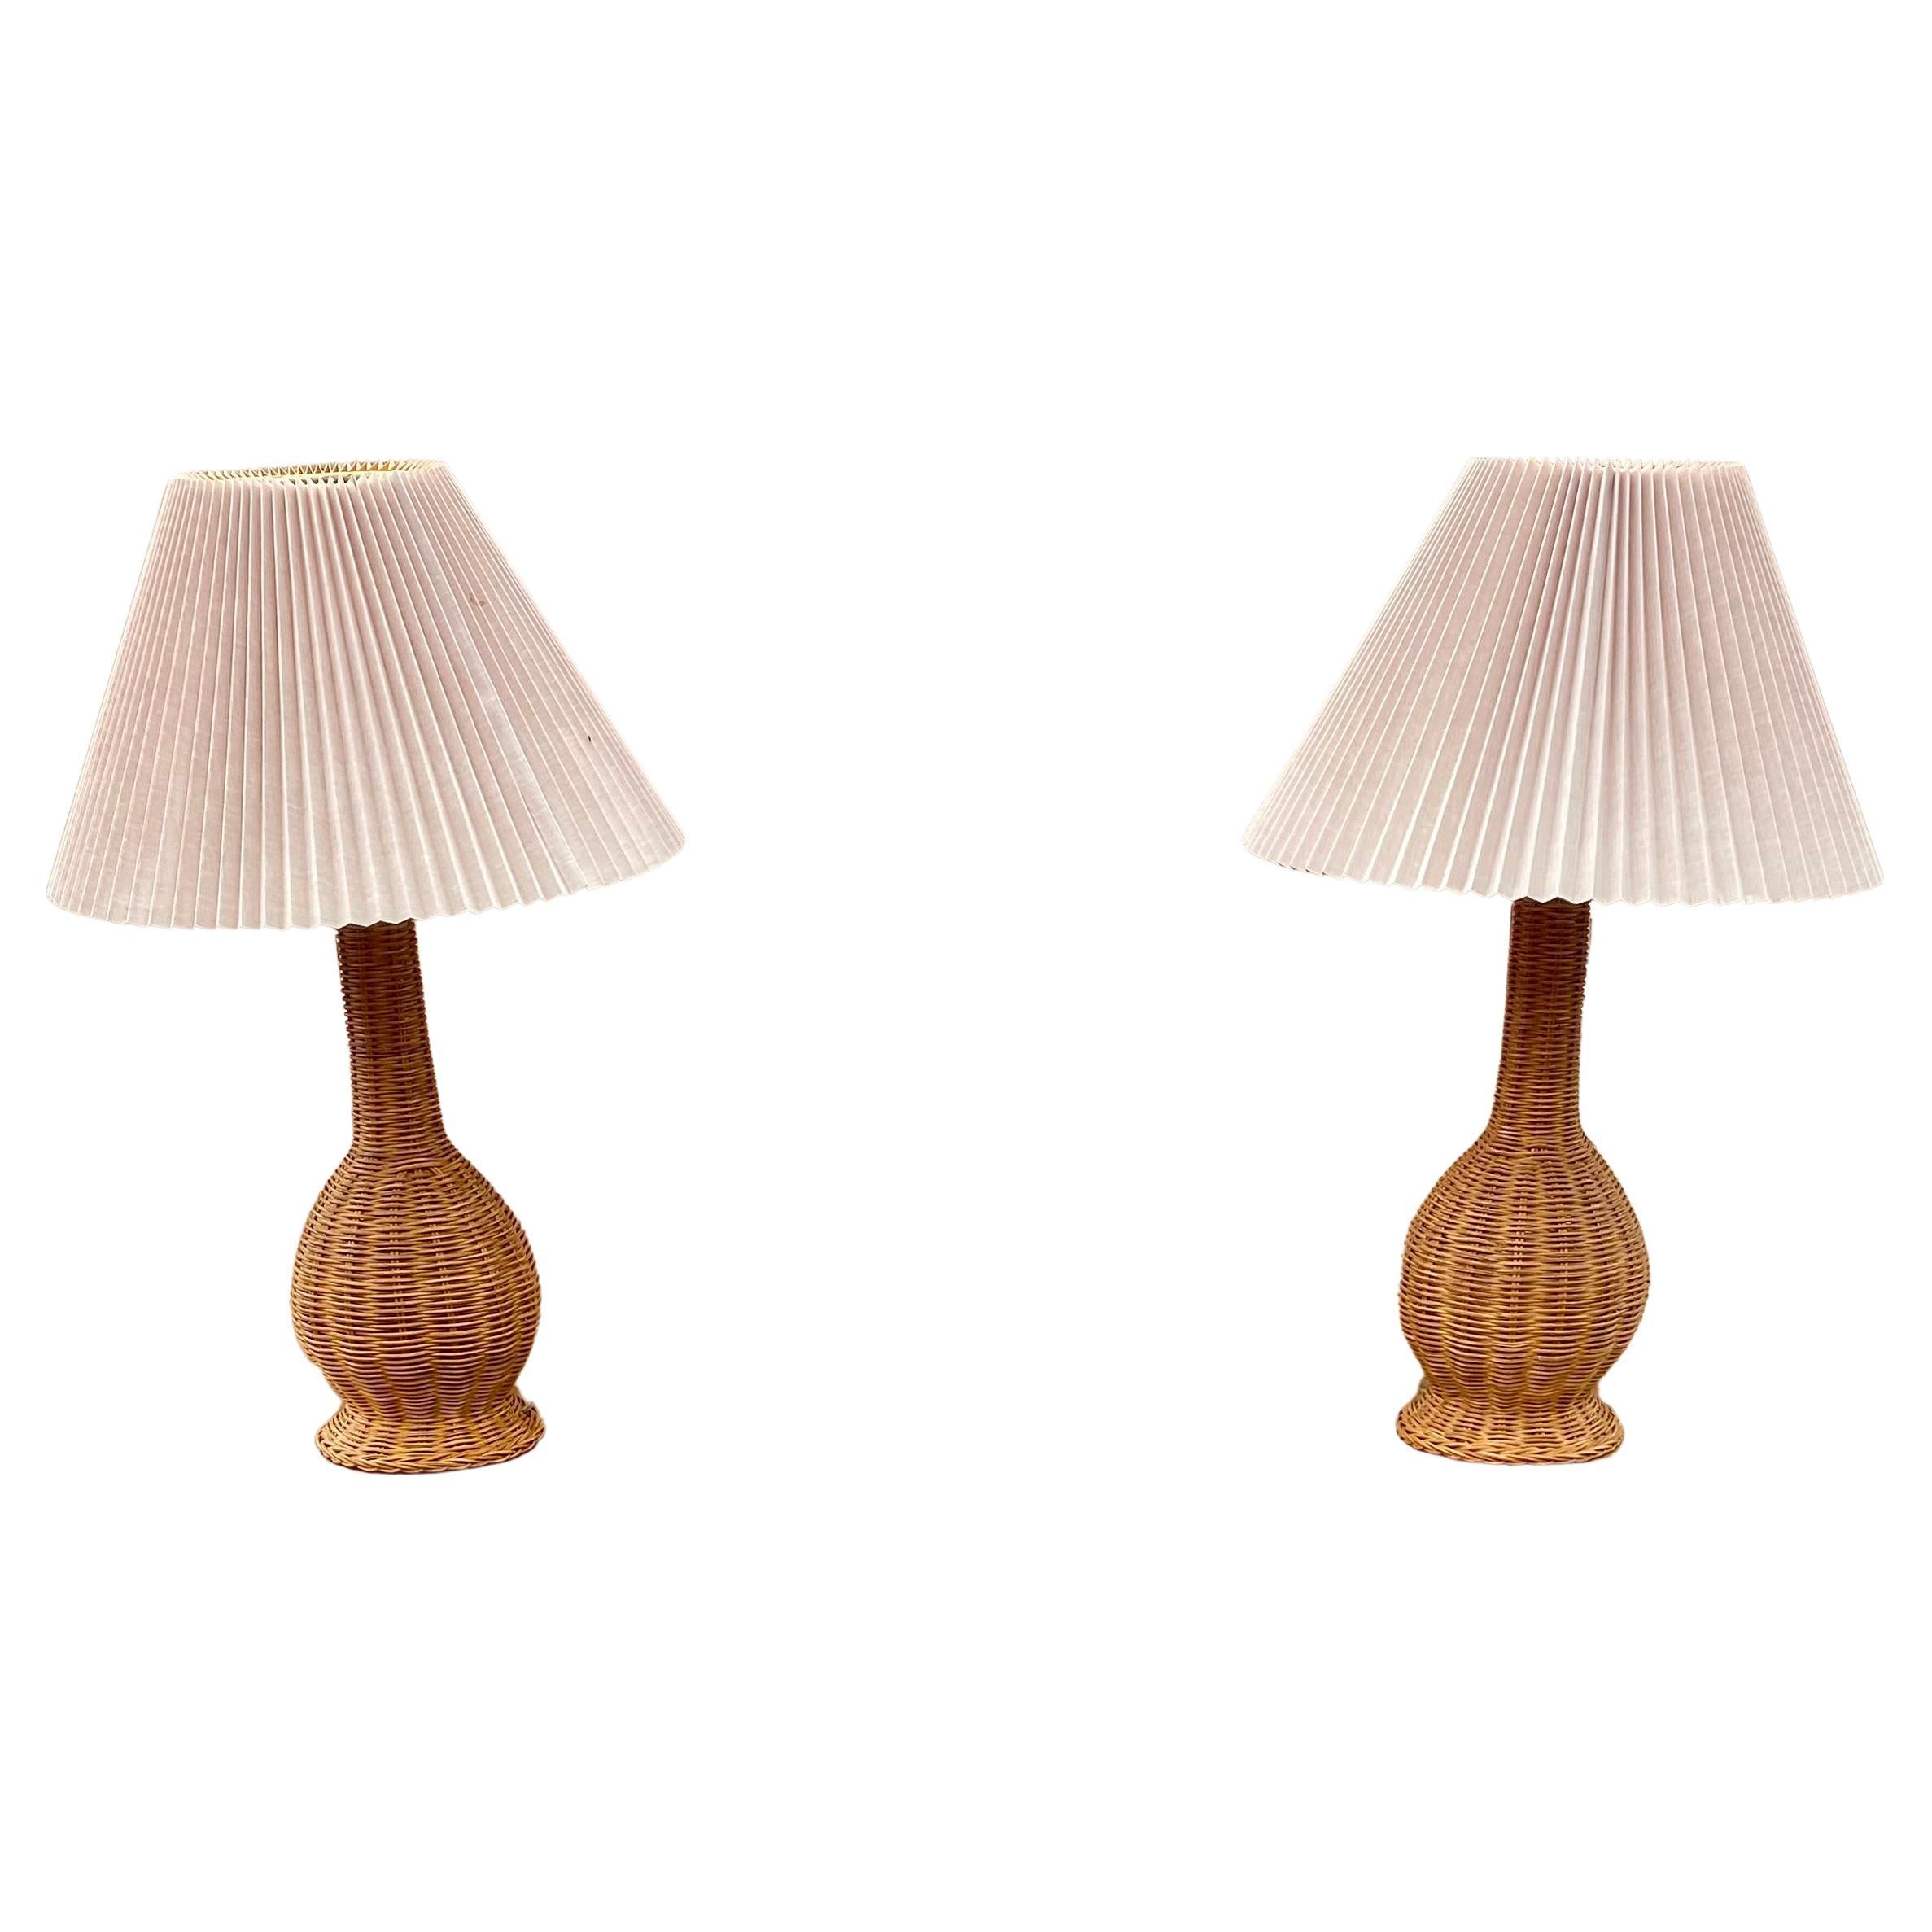 1970s Rattan Jar Wicker Table Lamps, Set of 2 For Sale